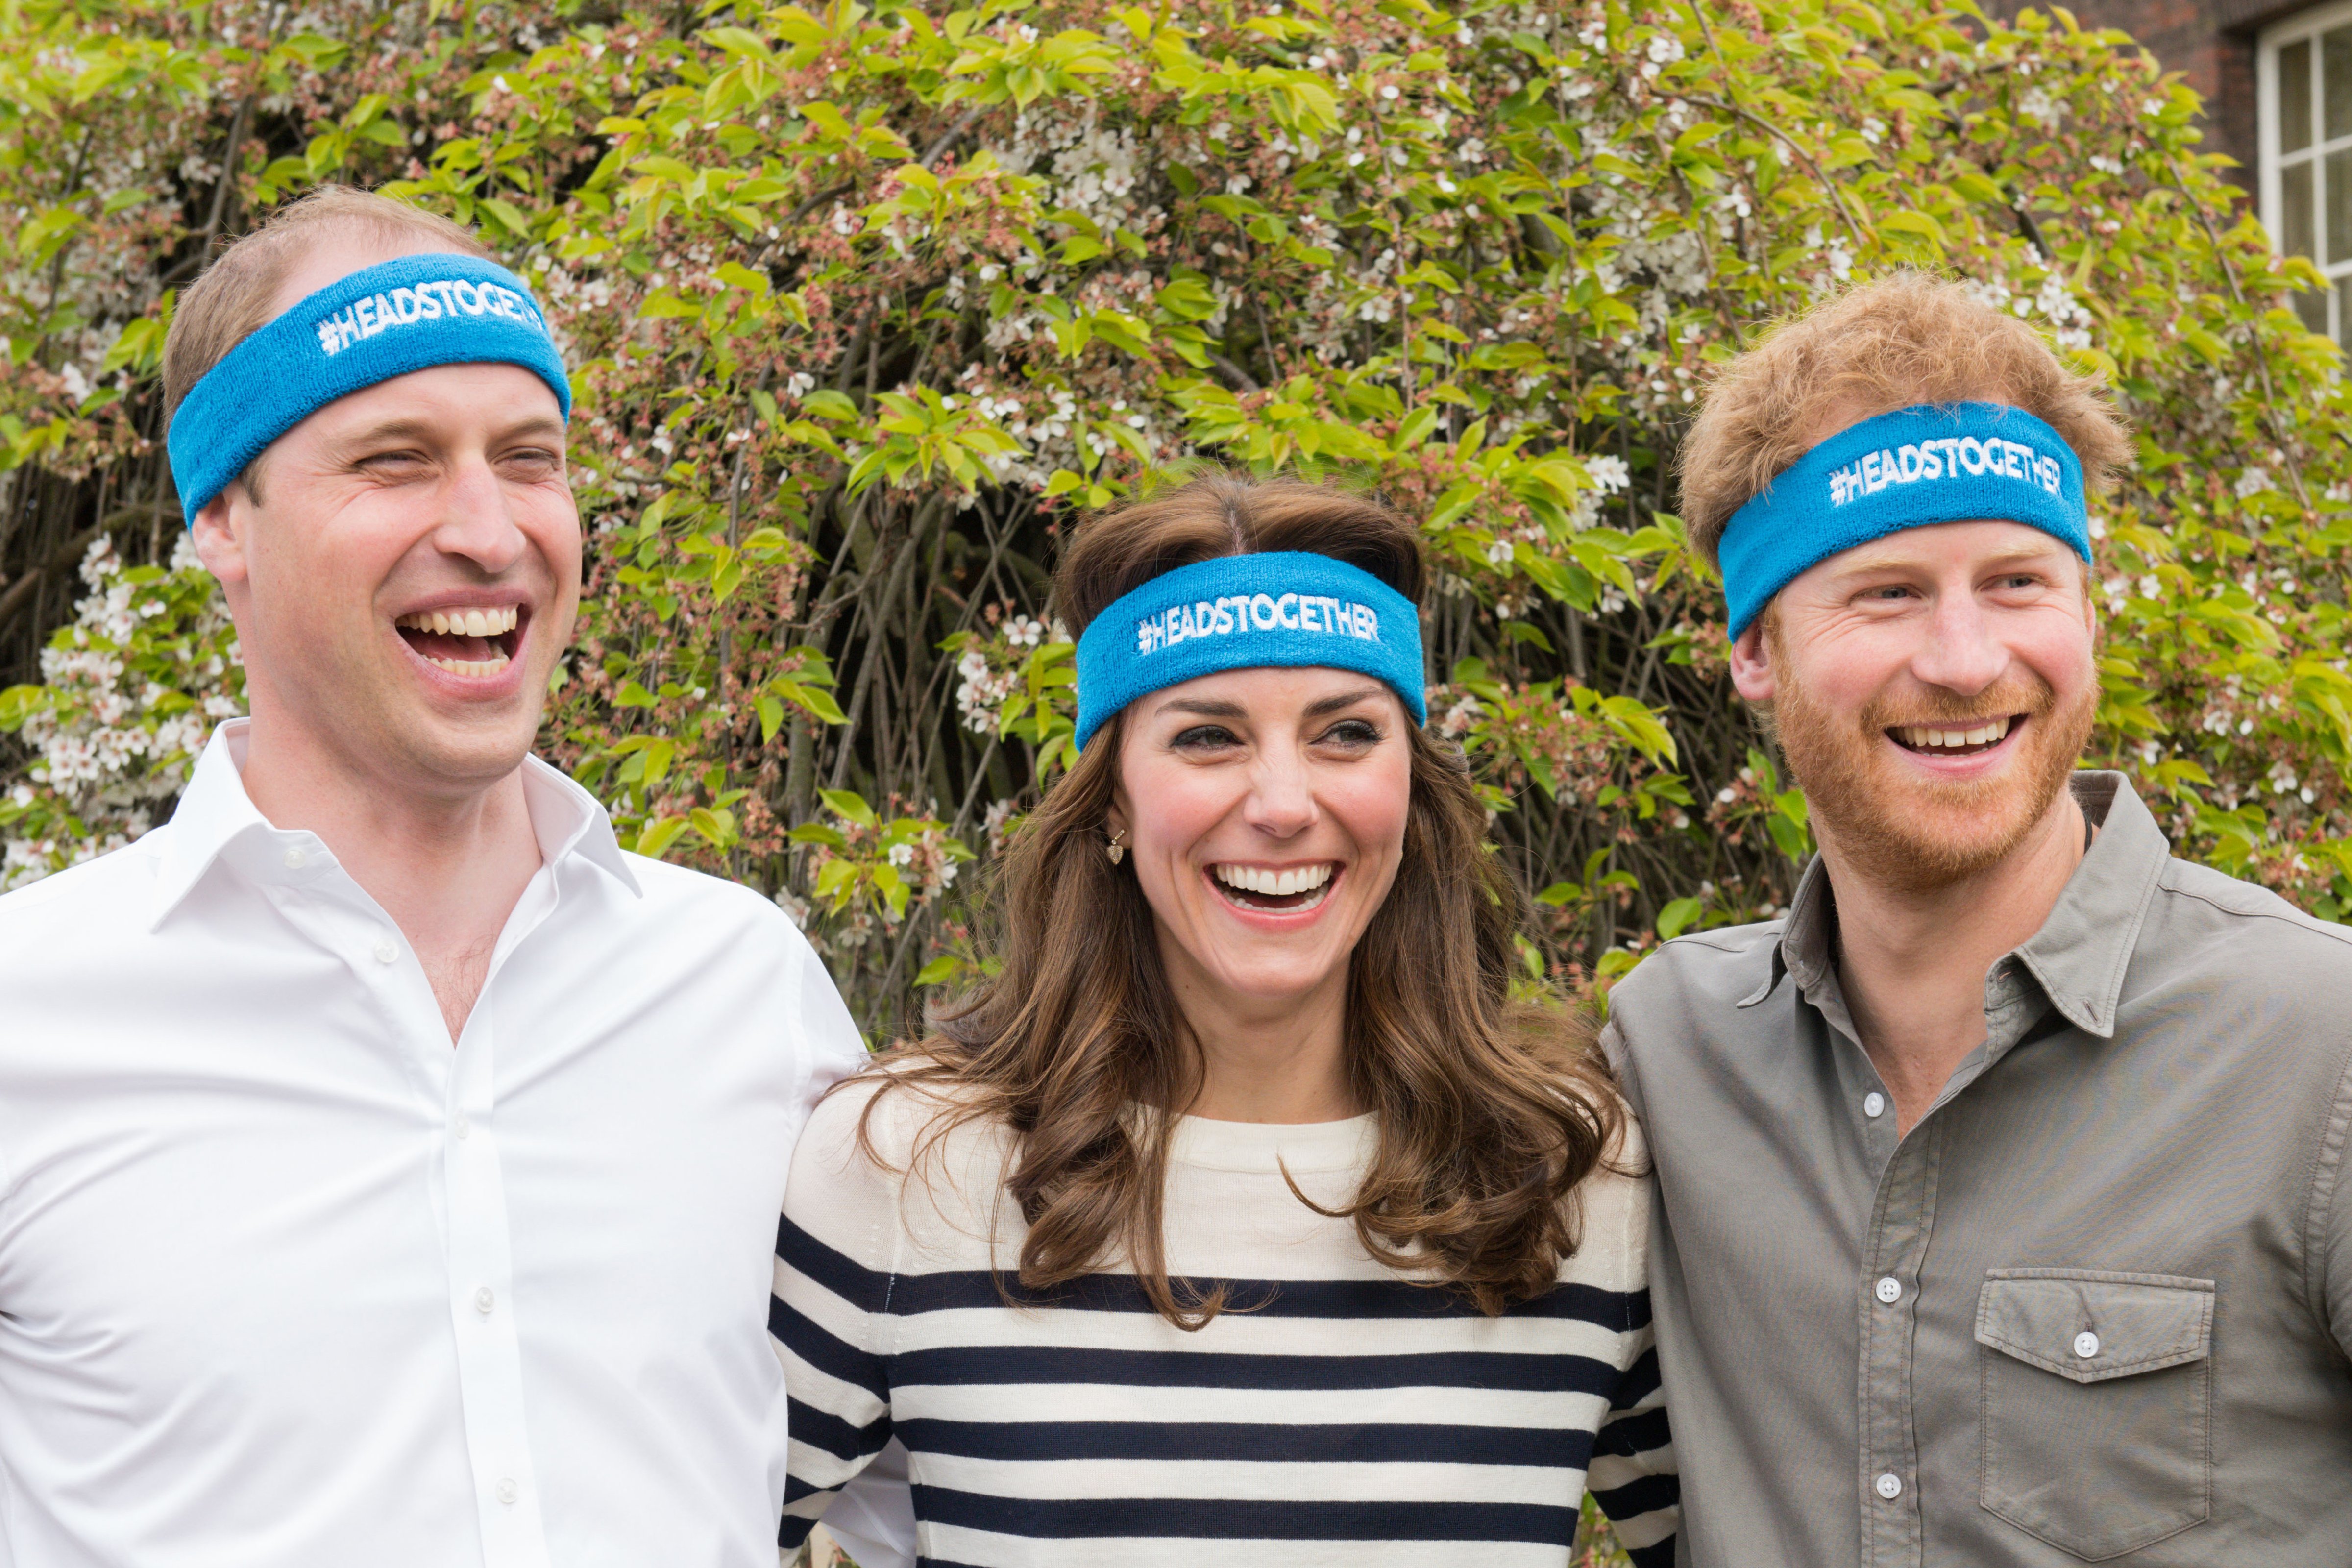 The Duke and Duchess of Cambridge and Prince Harry are spearheading a new campaign called Heads Together in partnership with inspiring charities, which aims to change the national conversation on mental wellbeing. (Nicky J Sims—Getty Images for Royal Foundation)